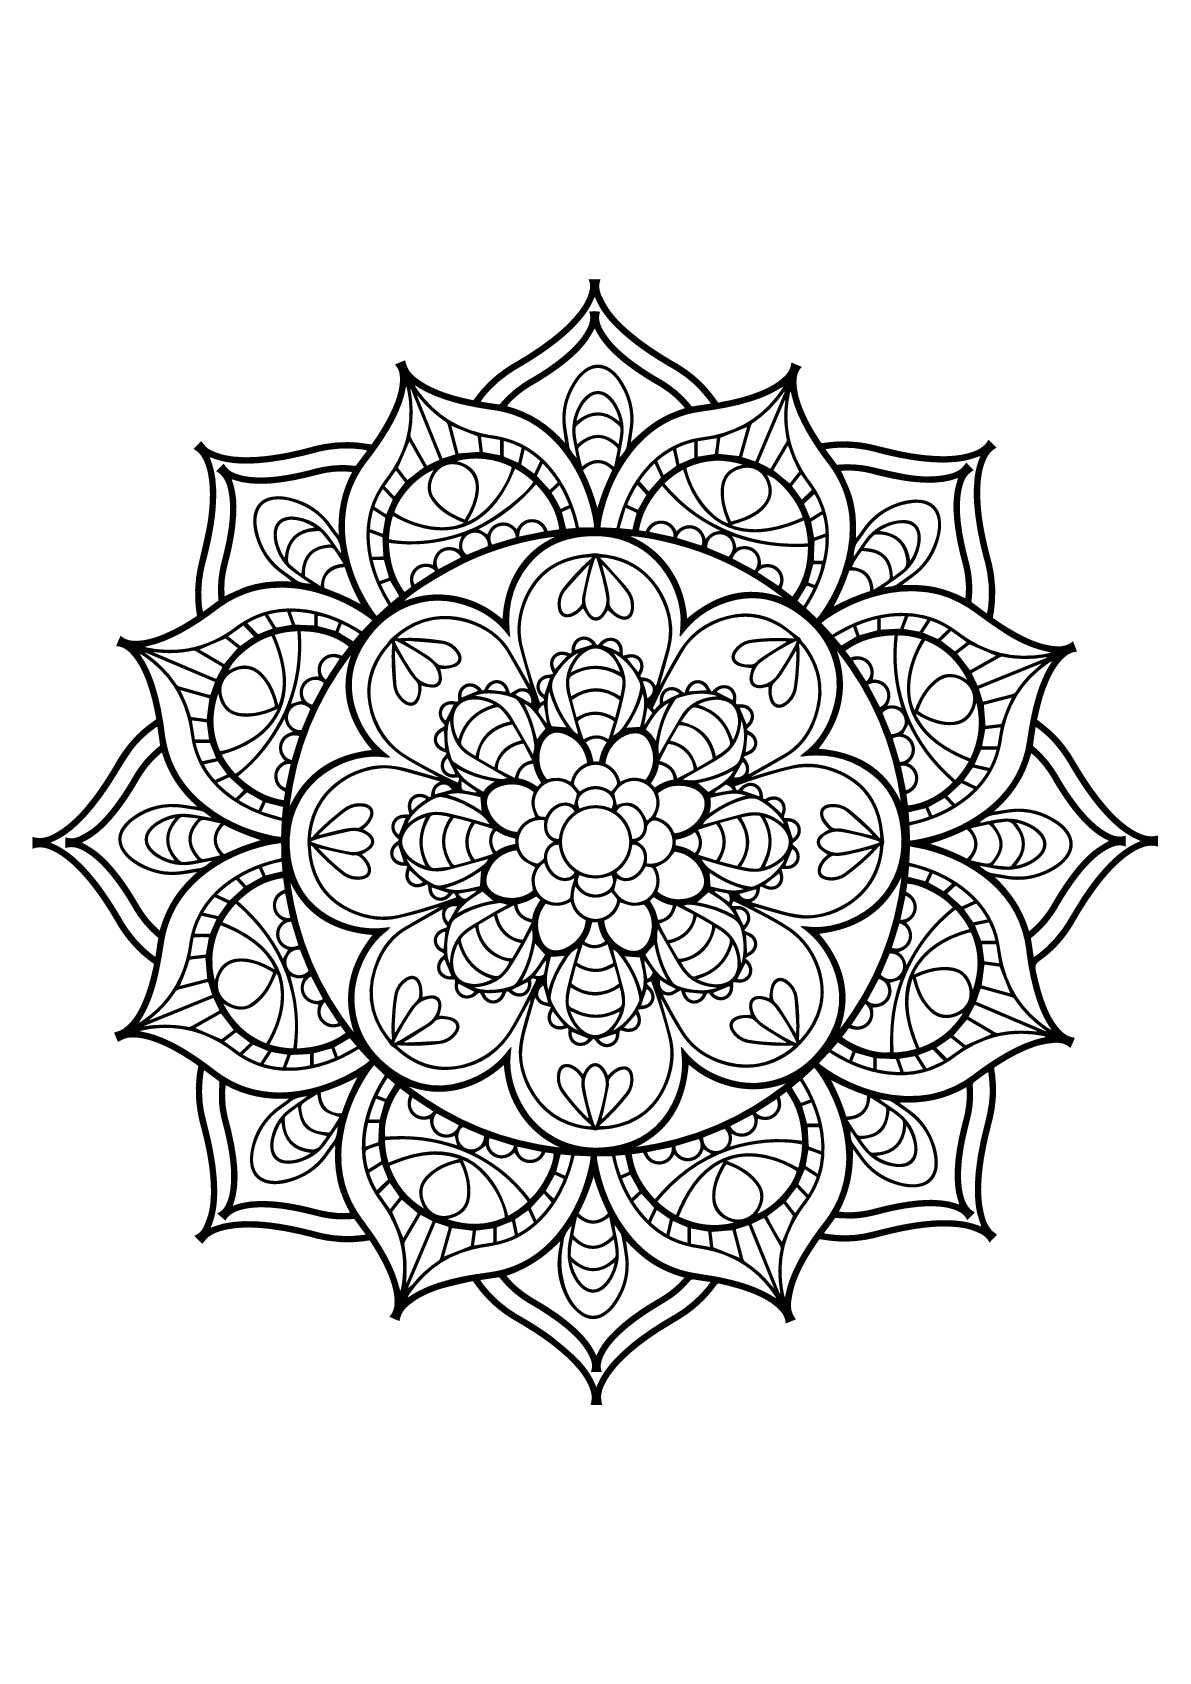 Anti-stress Mandala from Free Coloring book for adults